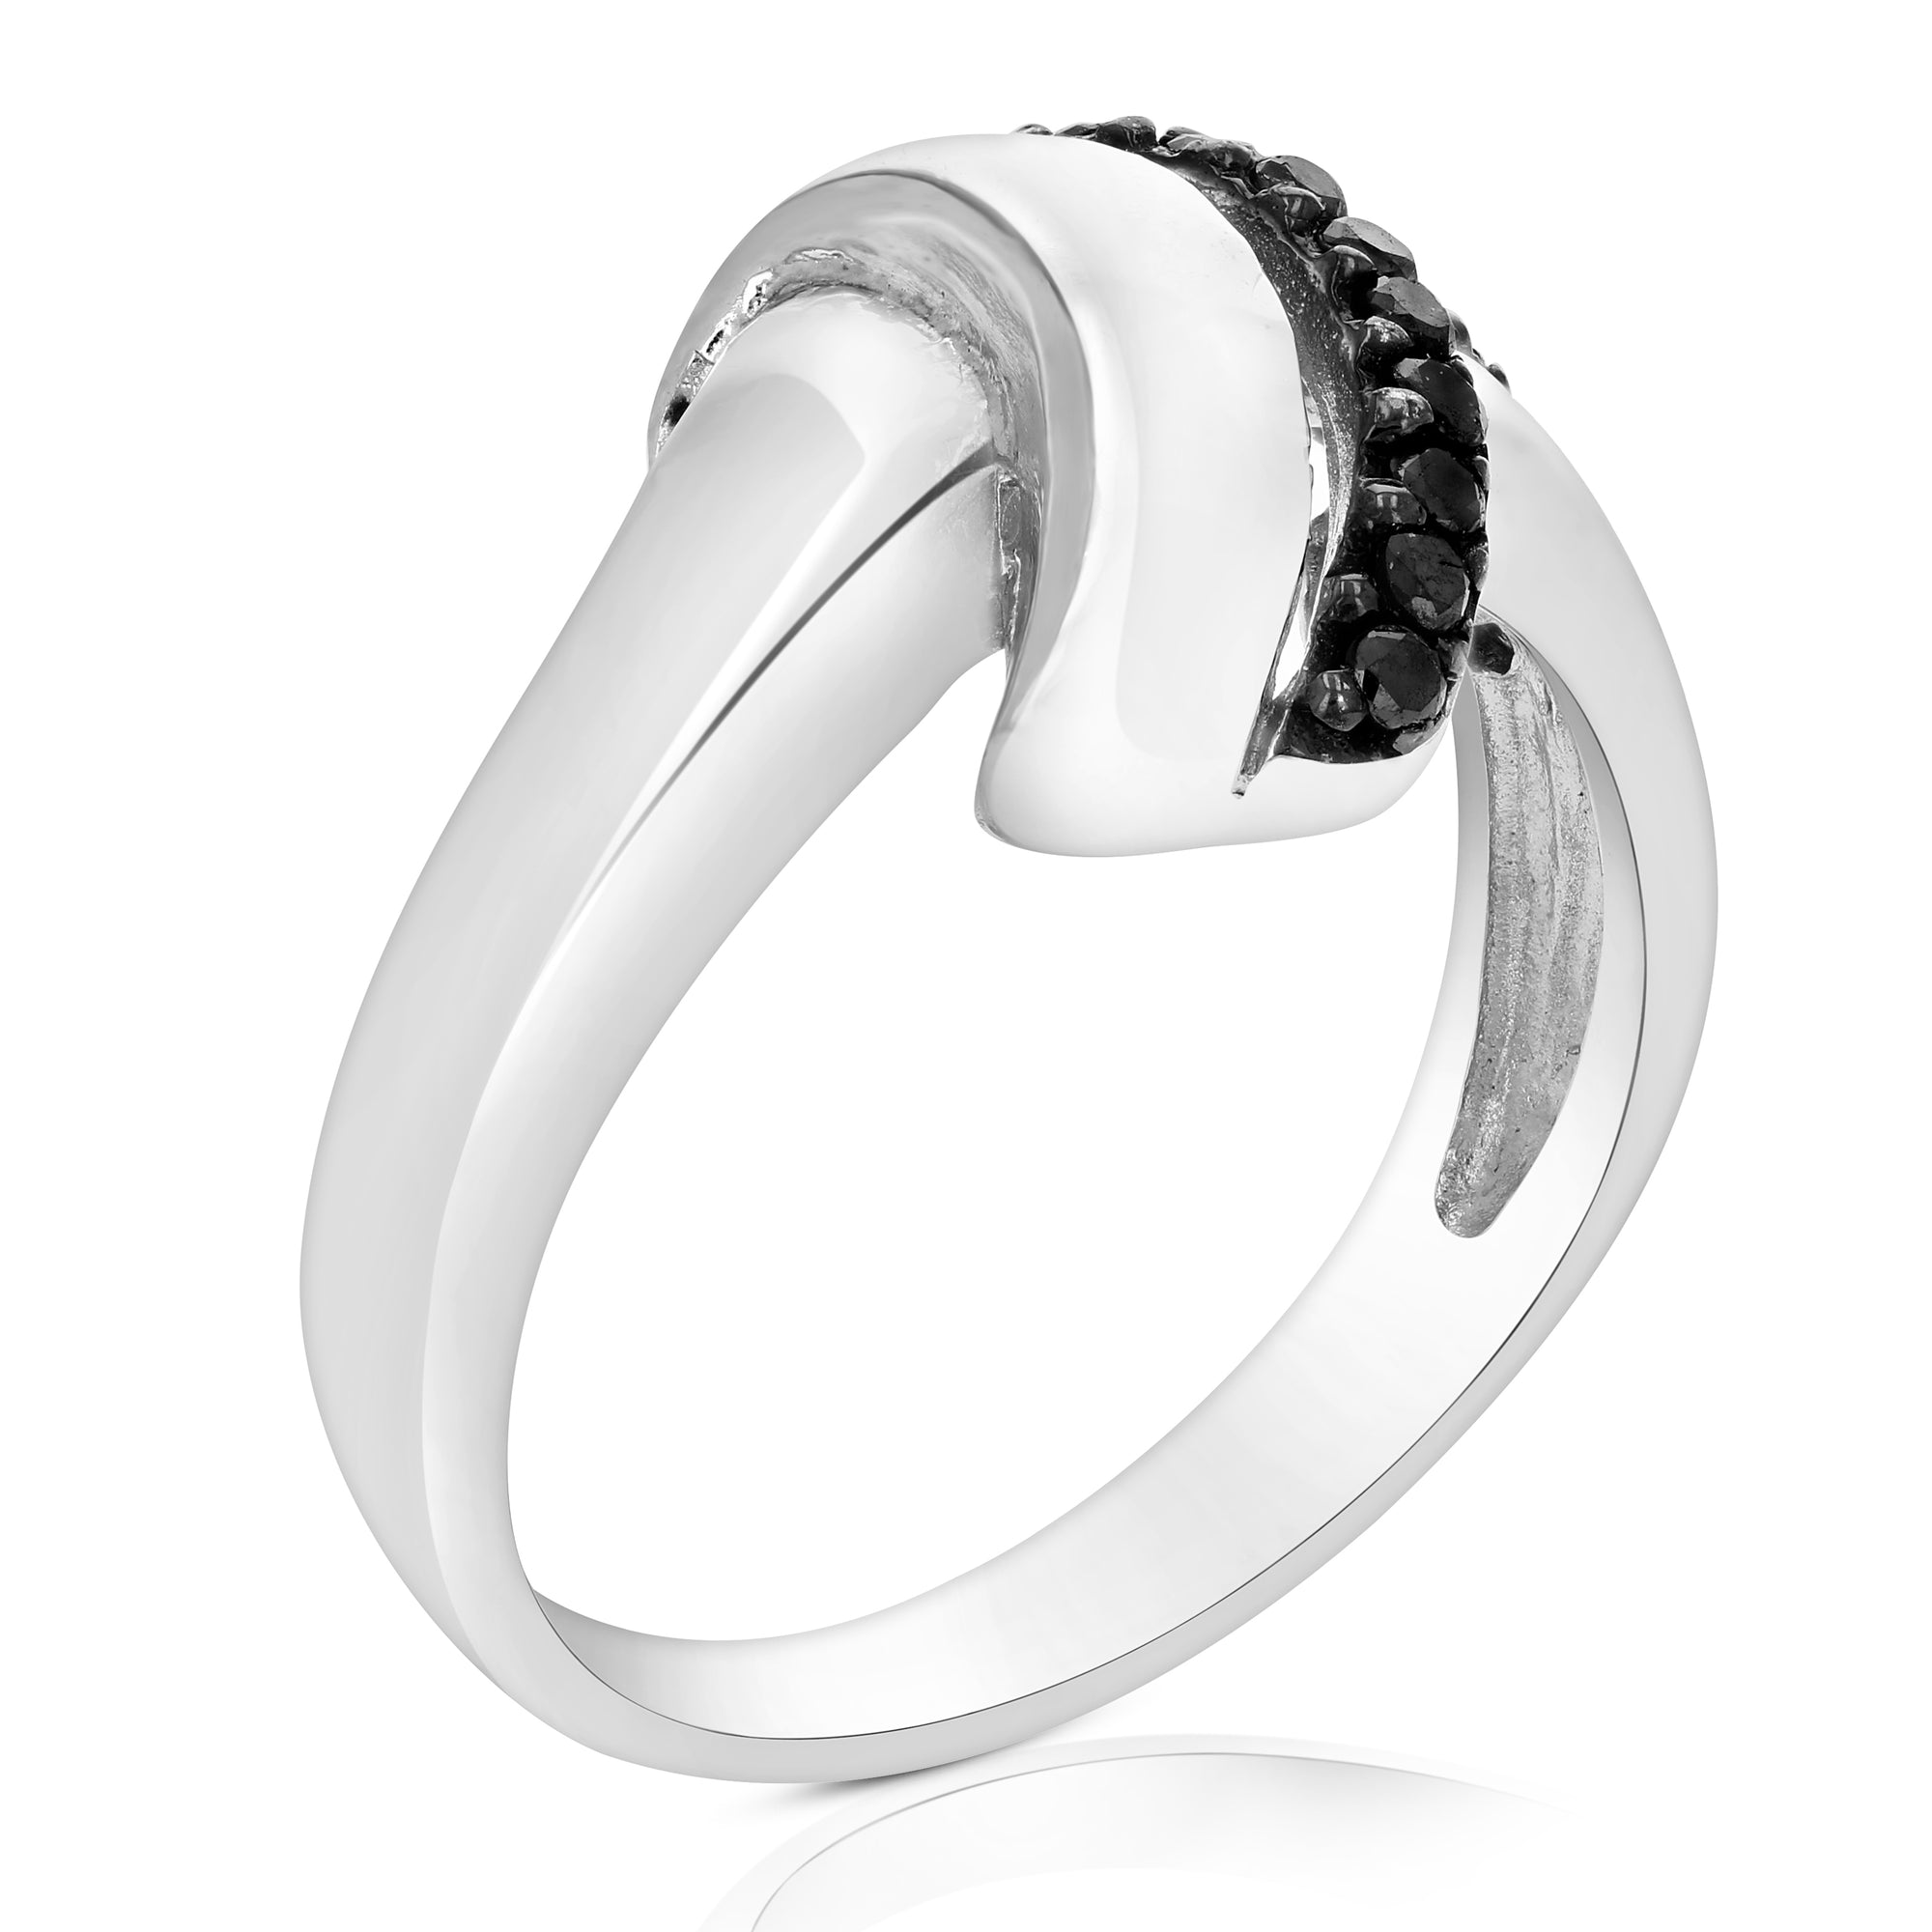 1/4 cttw Black Diamond Ring .925 Sterling Silver with Rhodium Plating Size 7